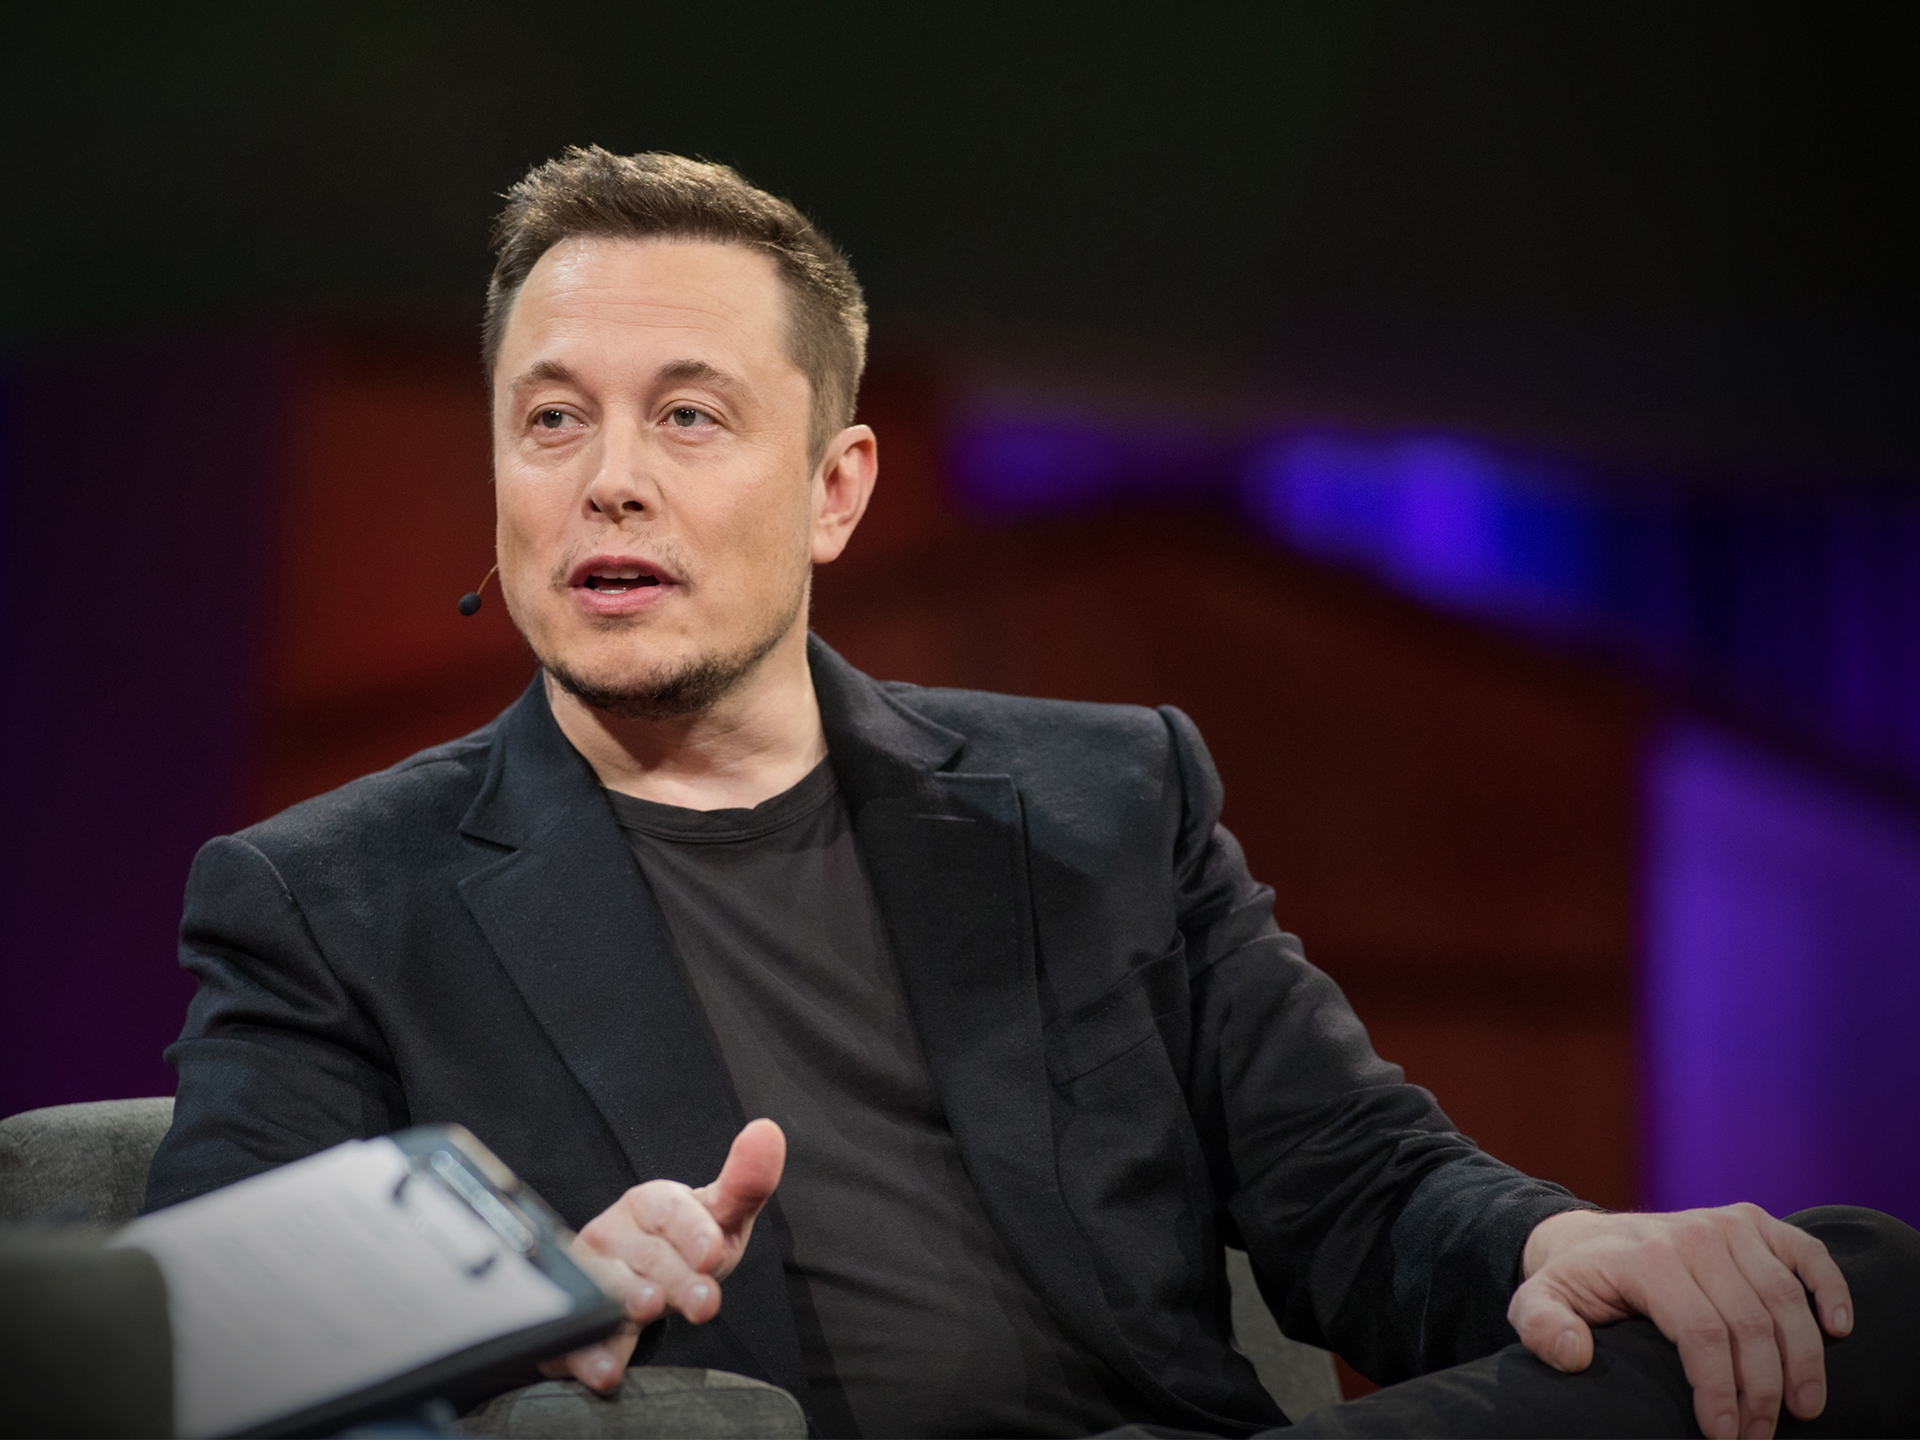 After Tesla CEO decided not to buy Twitter, things got heated up with legal filings, and now Elon Musk challenges Twitter CEO to a debate about bots.